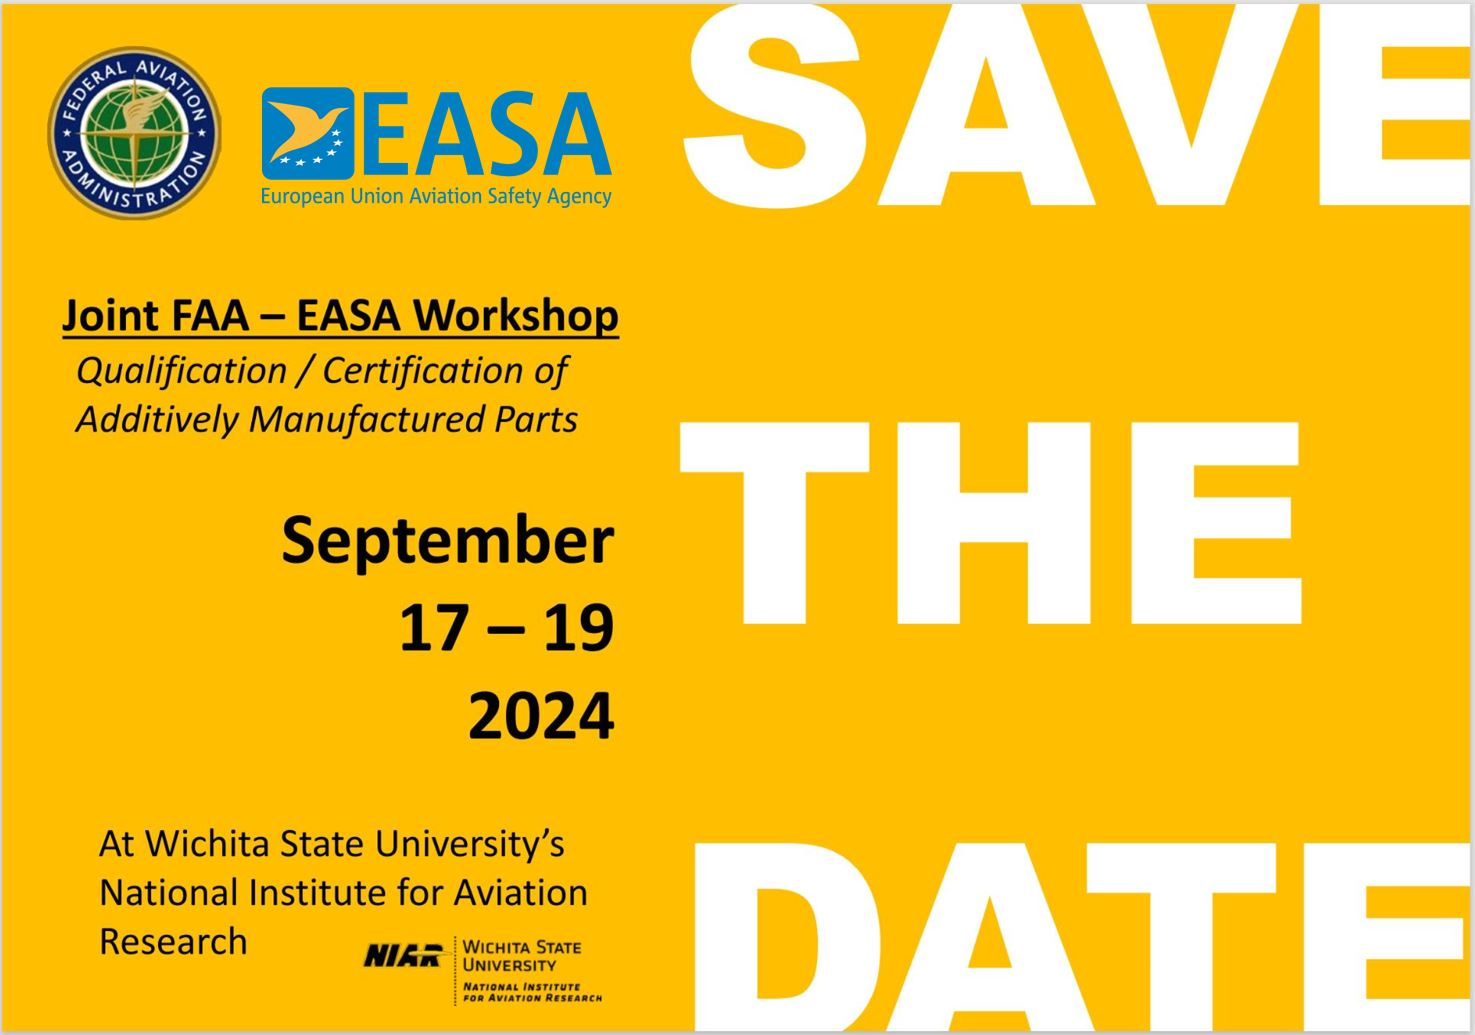 Joint FAA-EASA Additive Manufacturing Workshop 2024